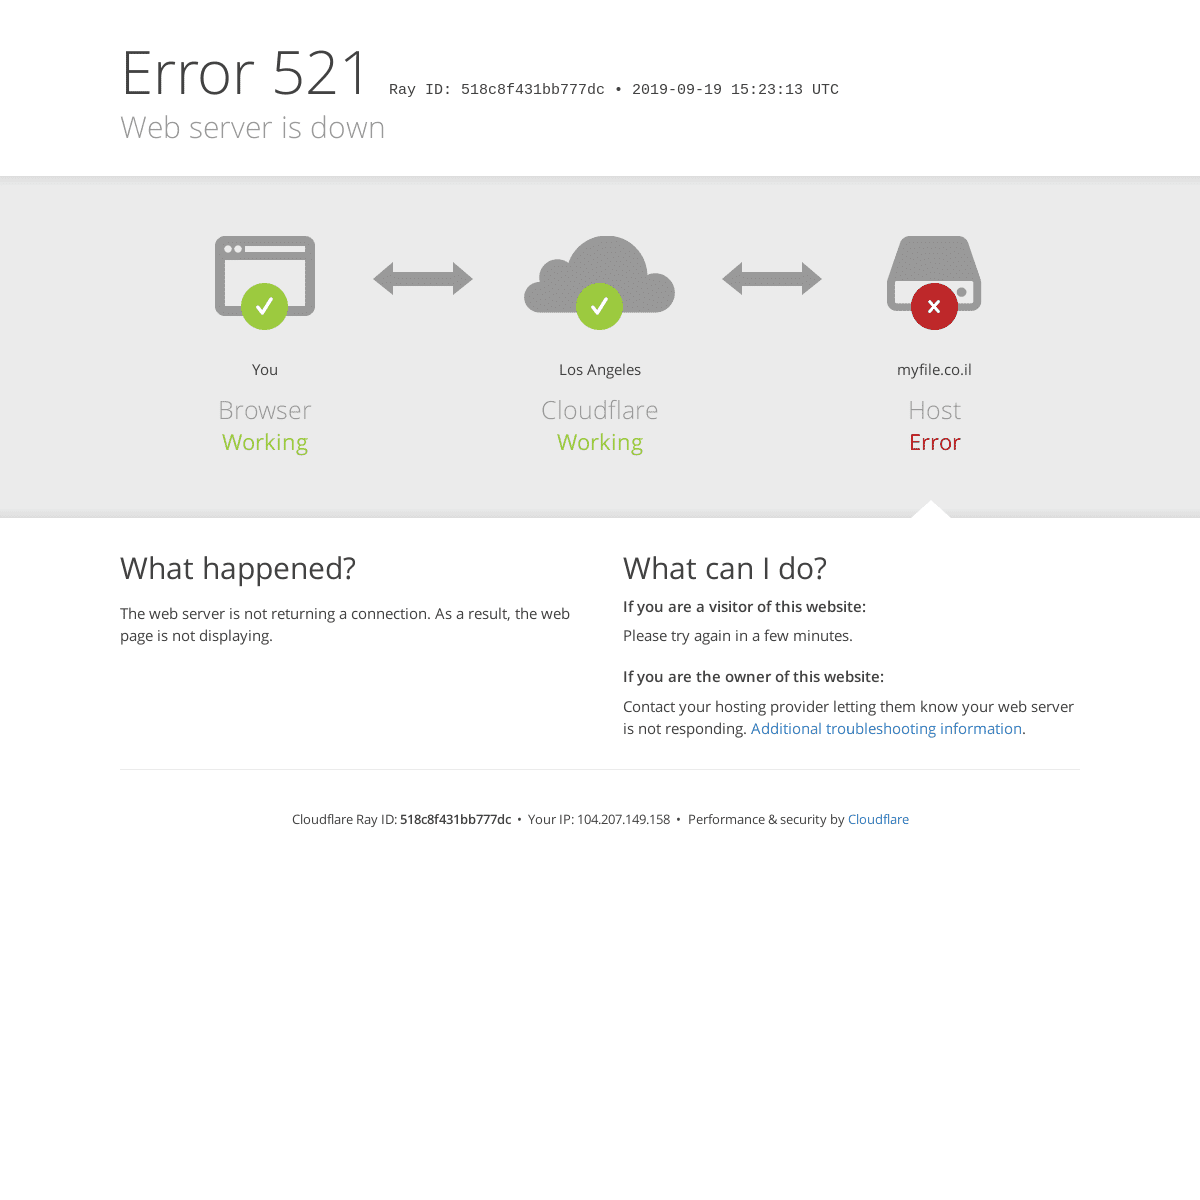 myfile.co.il | 521: Web server is down